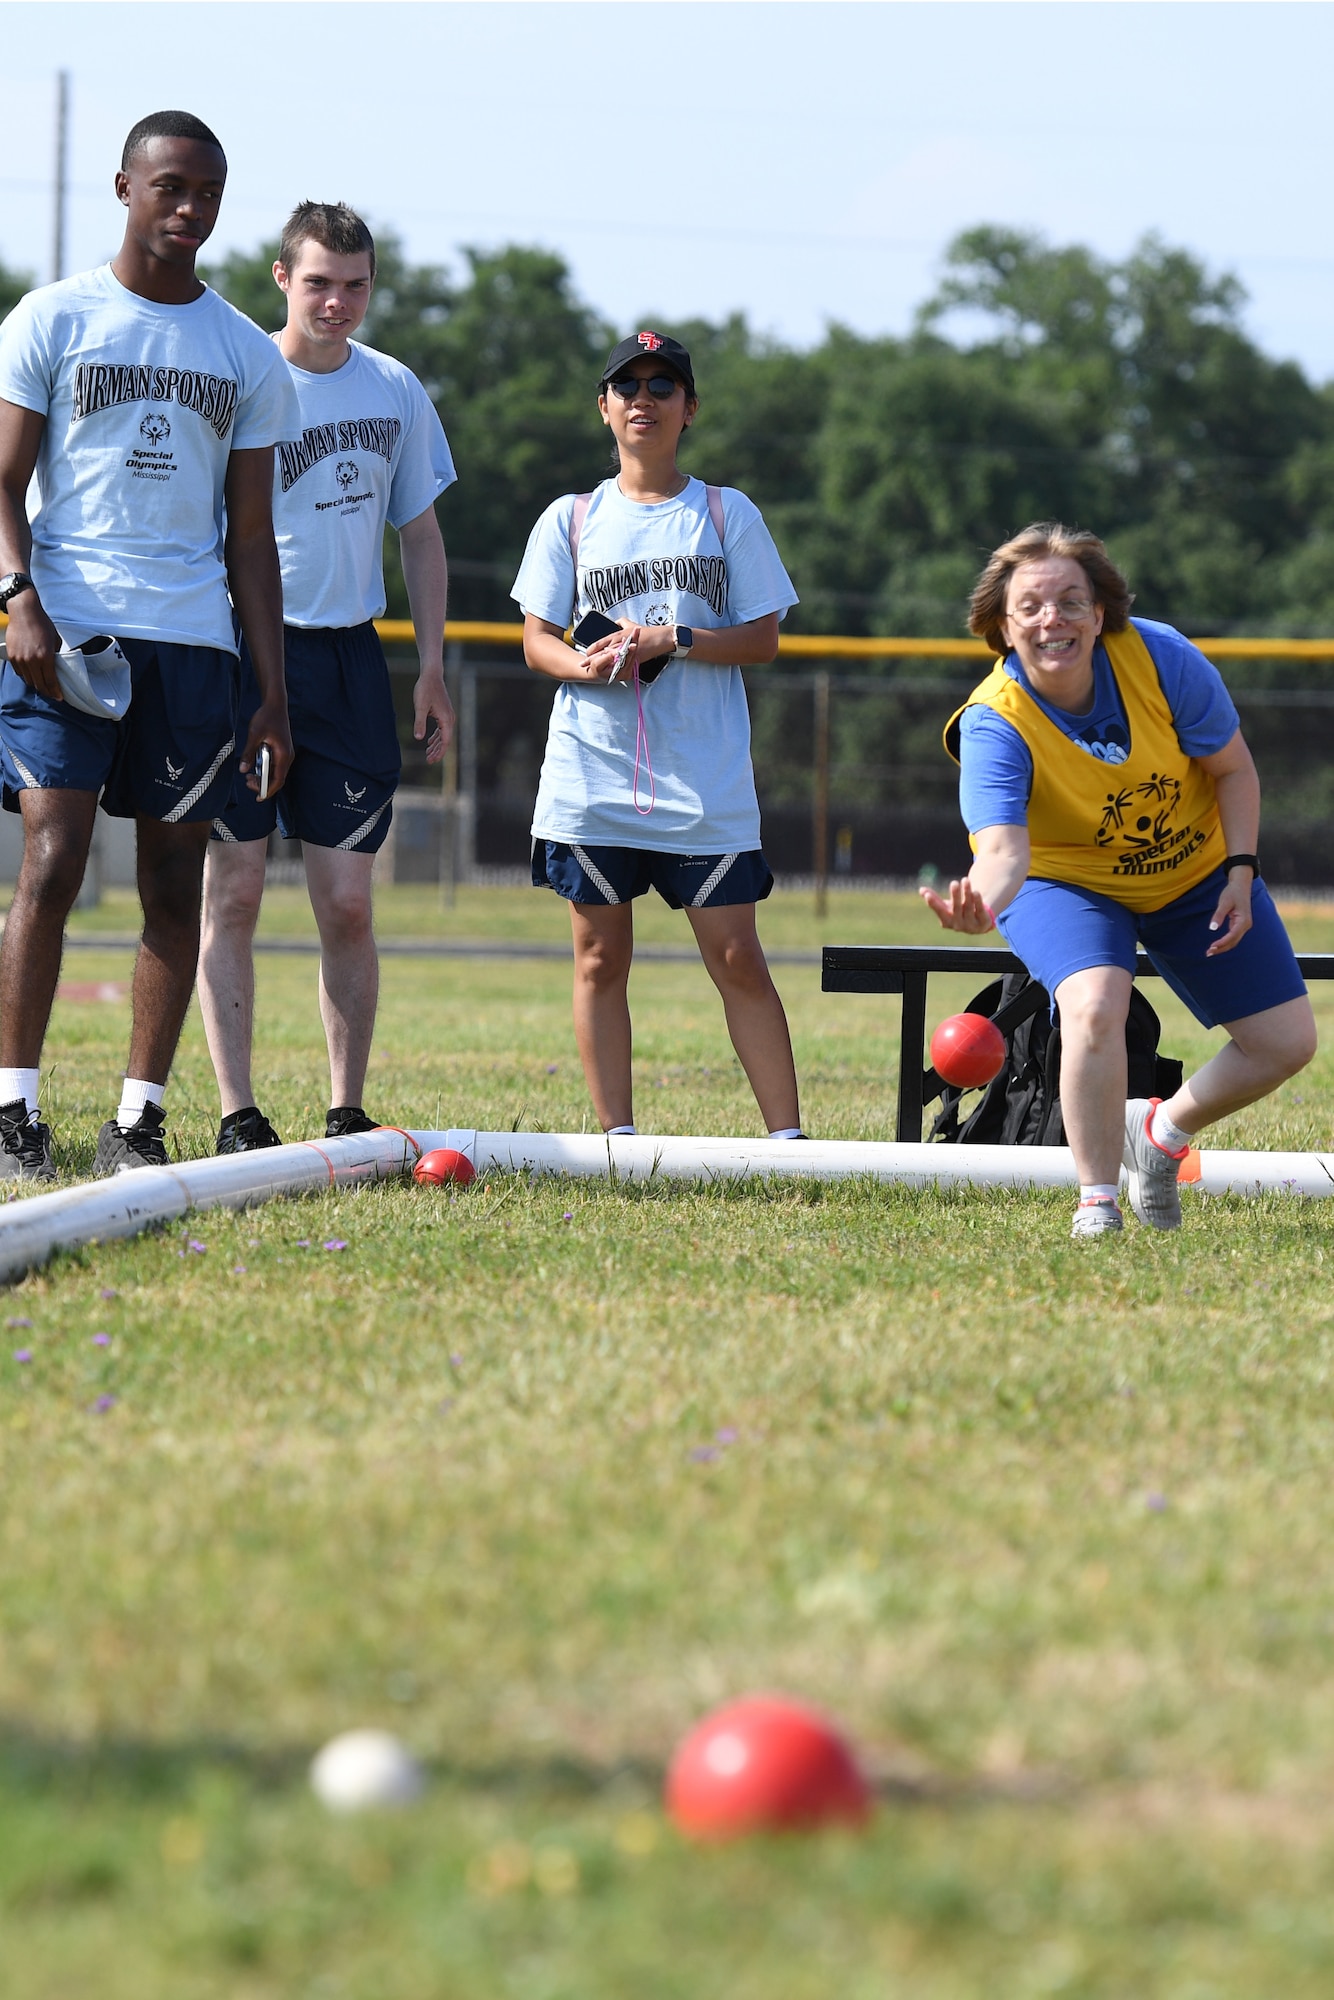 Dean Goodwin, Area 1 athlete, participates in bocce during the Special Olympics Mississippi Summer Games at Keesler Air Force Base, Miss., May 14, 2022. Over 600 athletes participated in the Summer Games. (U.S. Air Force photo by Kemberly Groue)